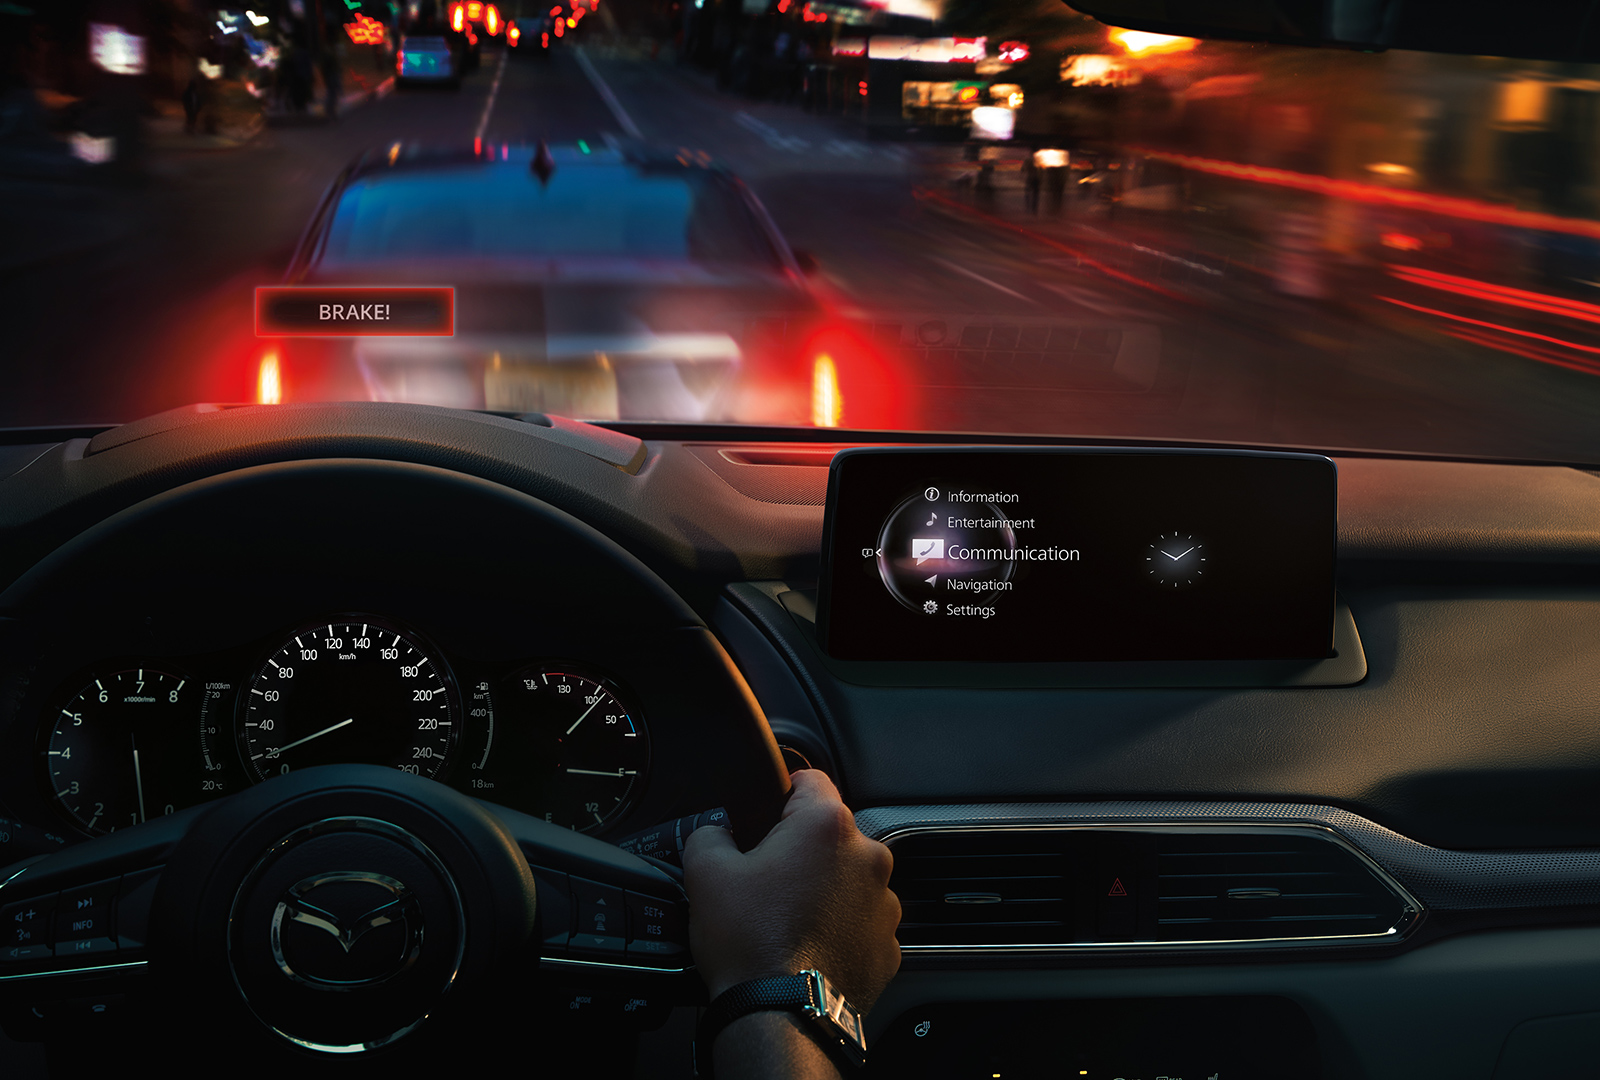 Active Driving Display projects the word “BRAKE!” onto windshield with illuminated brakelights of vehicle ahead visible.